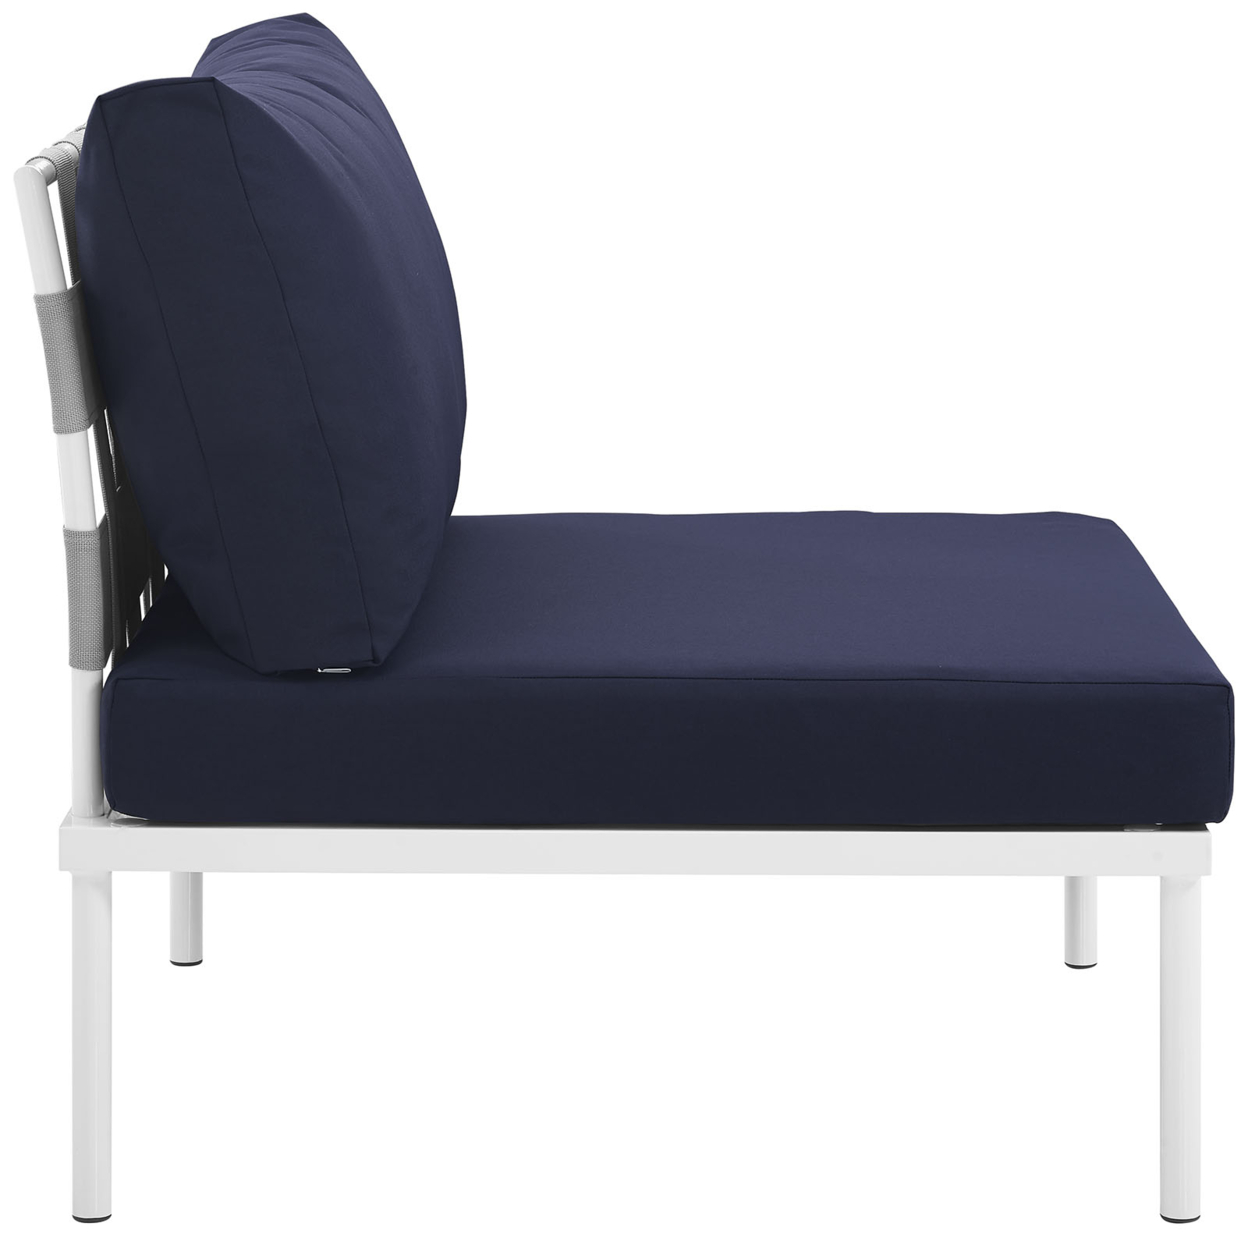 Modway Harmony Outdoor Patio Aluminum Fabric Armless Chair in White/Navy - image 2 of 4